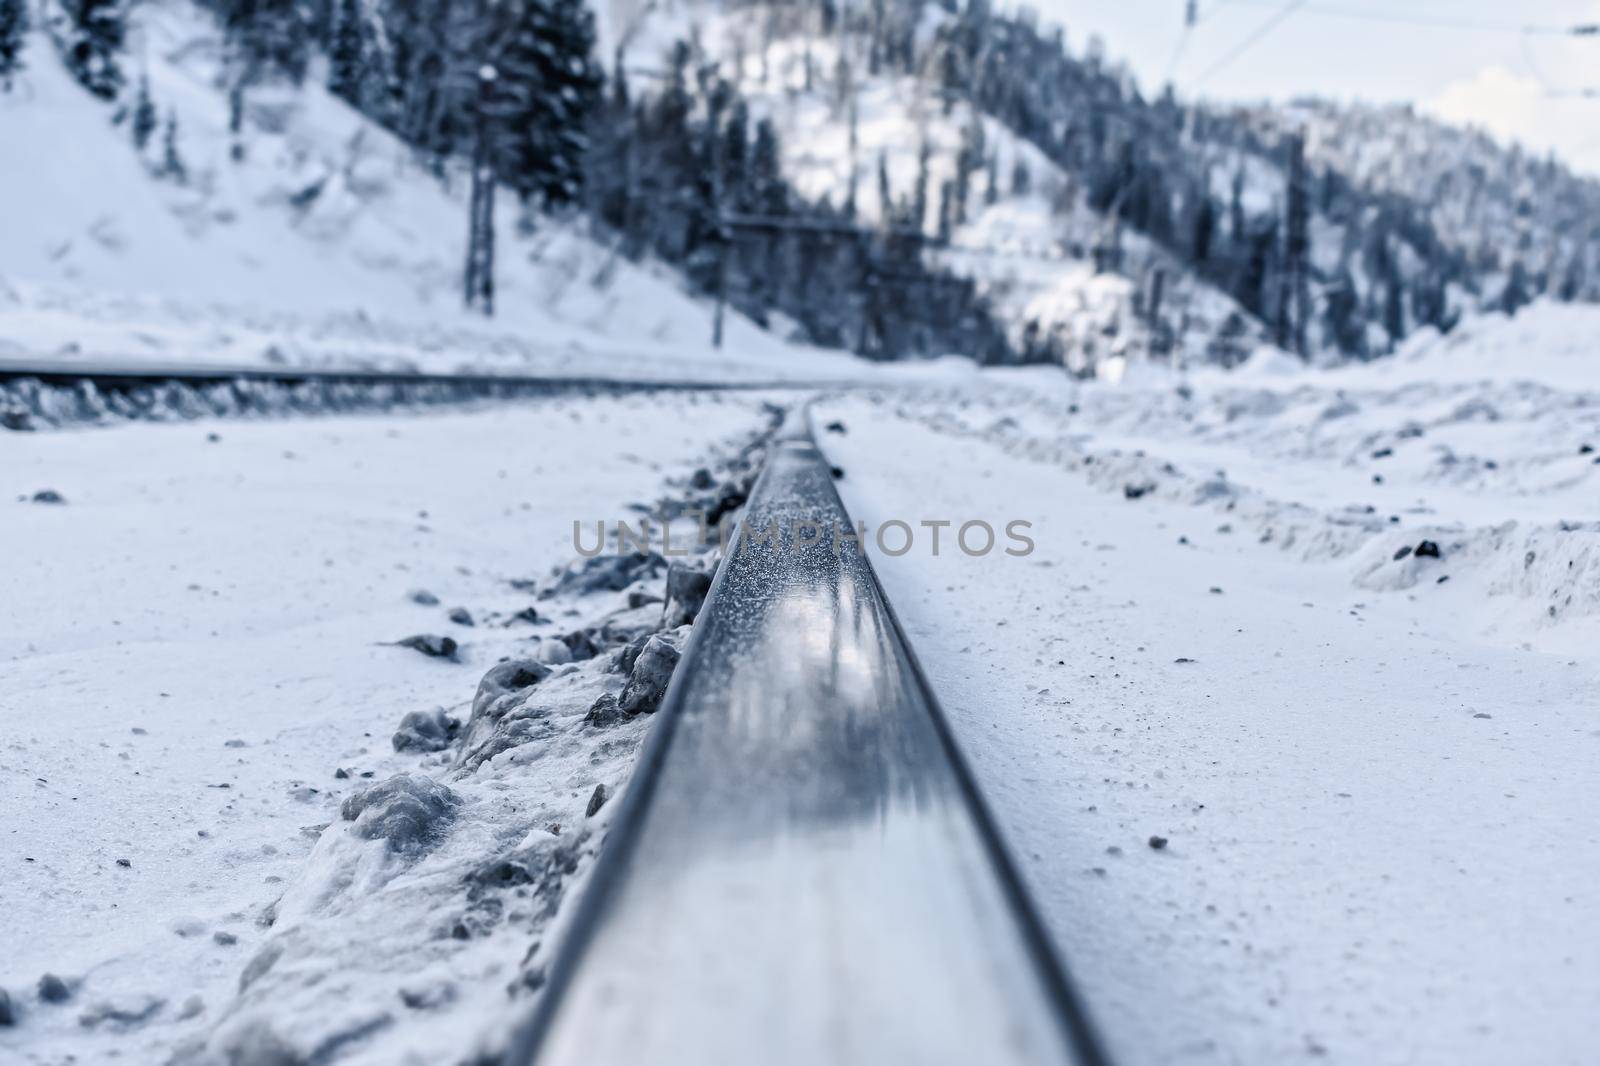 Railroad rails close up on the background of snowy mountains in winter